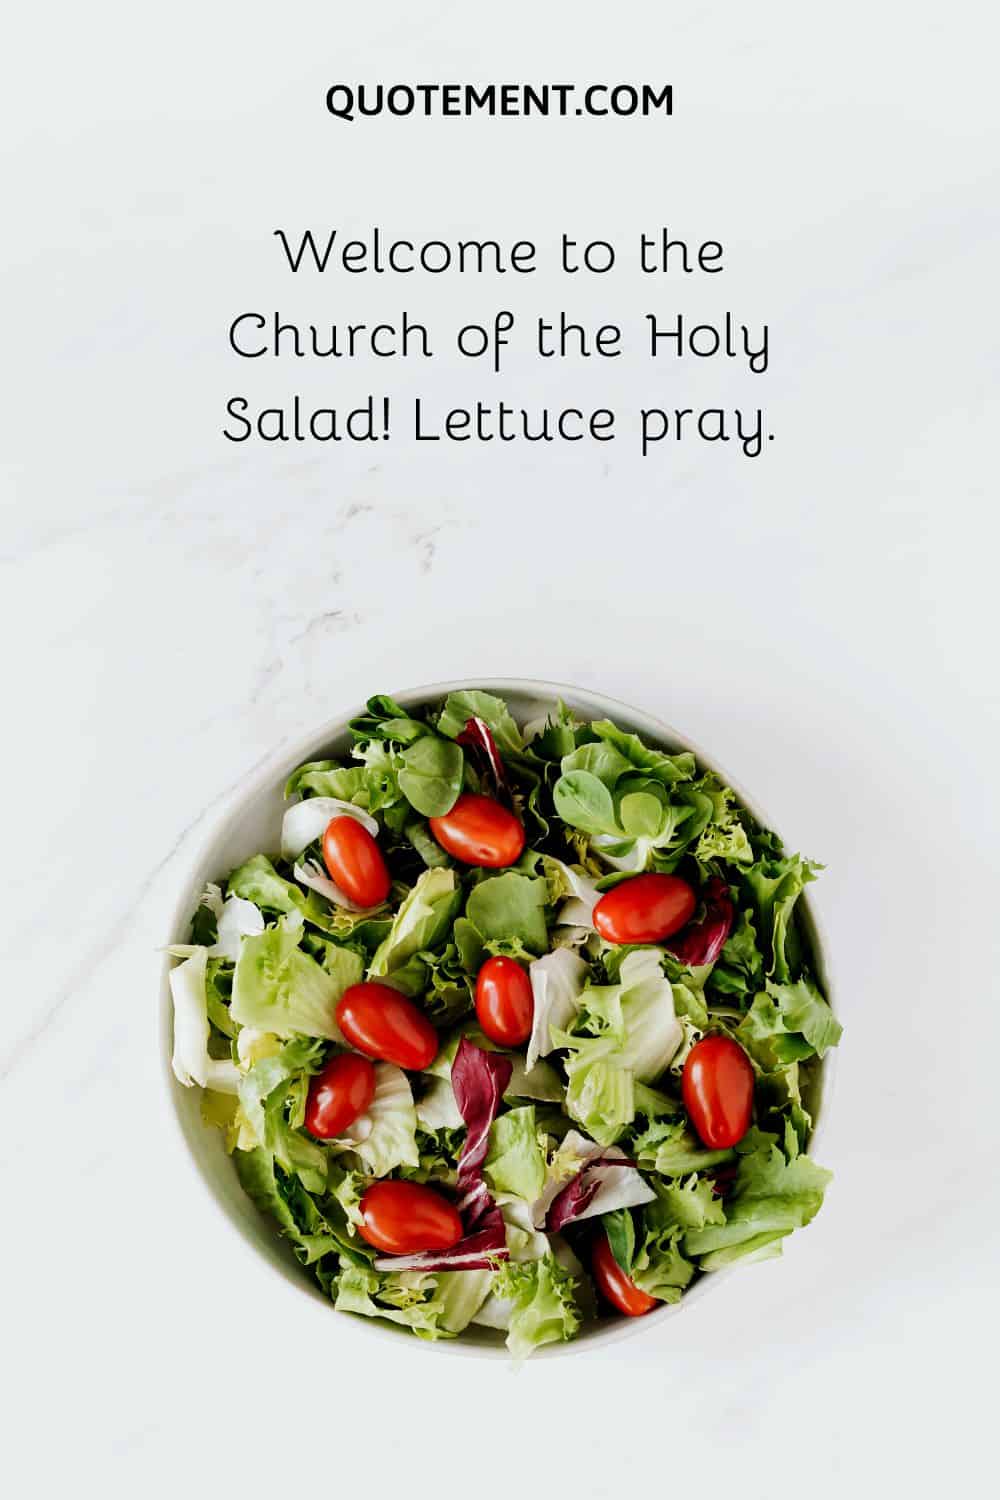 Welcome to the Church of the Holy Salad!